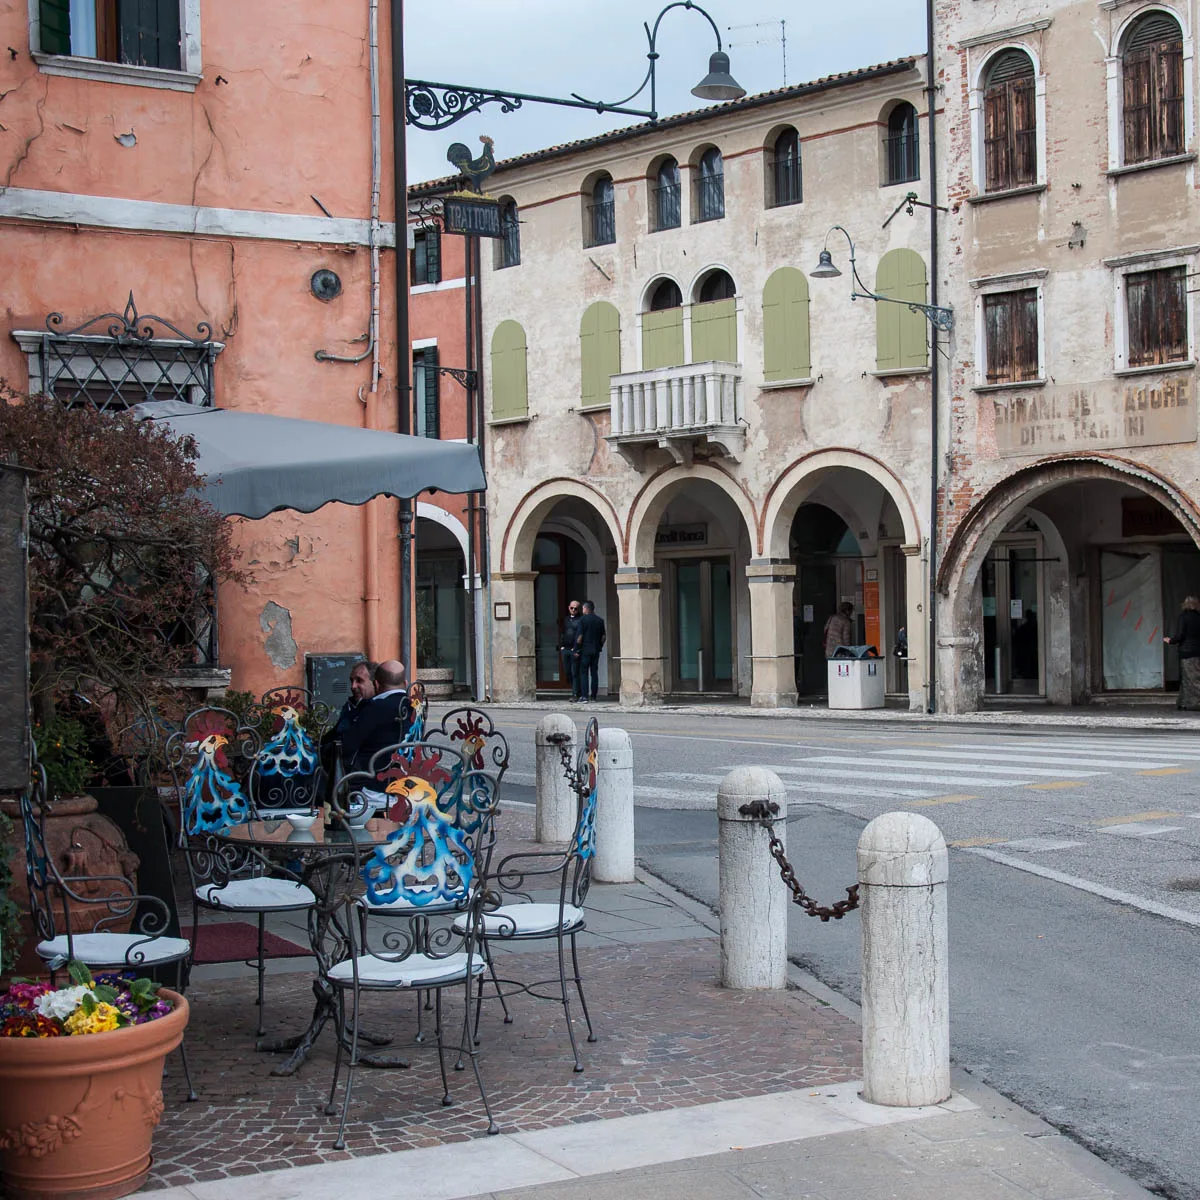 Rooster-inspired chairs in front of a local restaurant - Noale, Veneto, Italy - www.rossiwrites.com